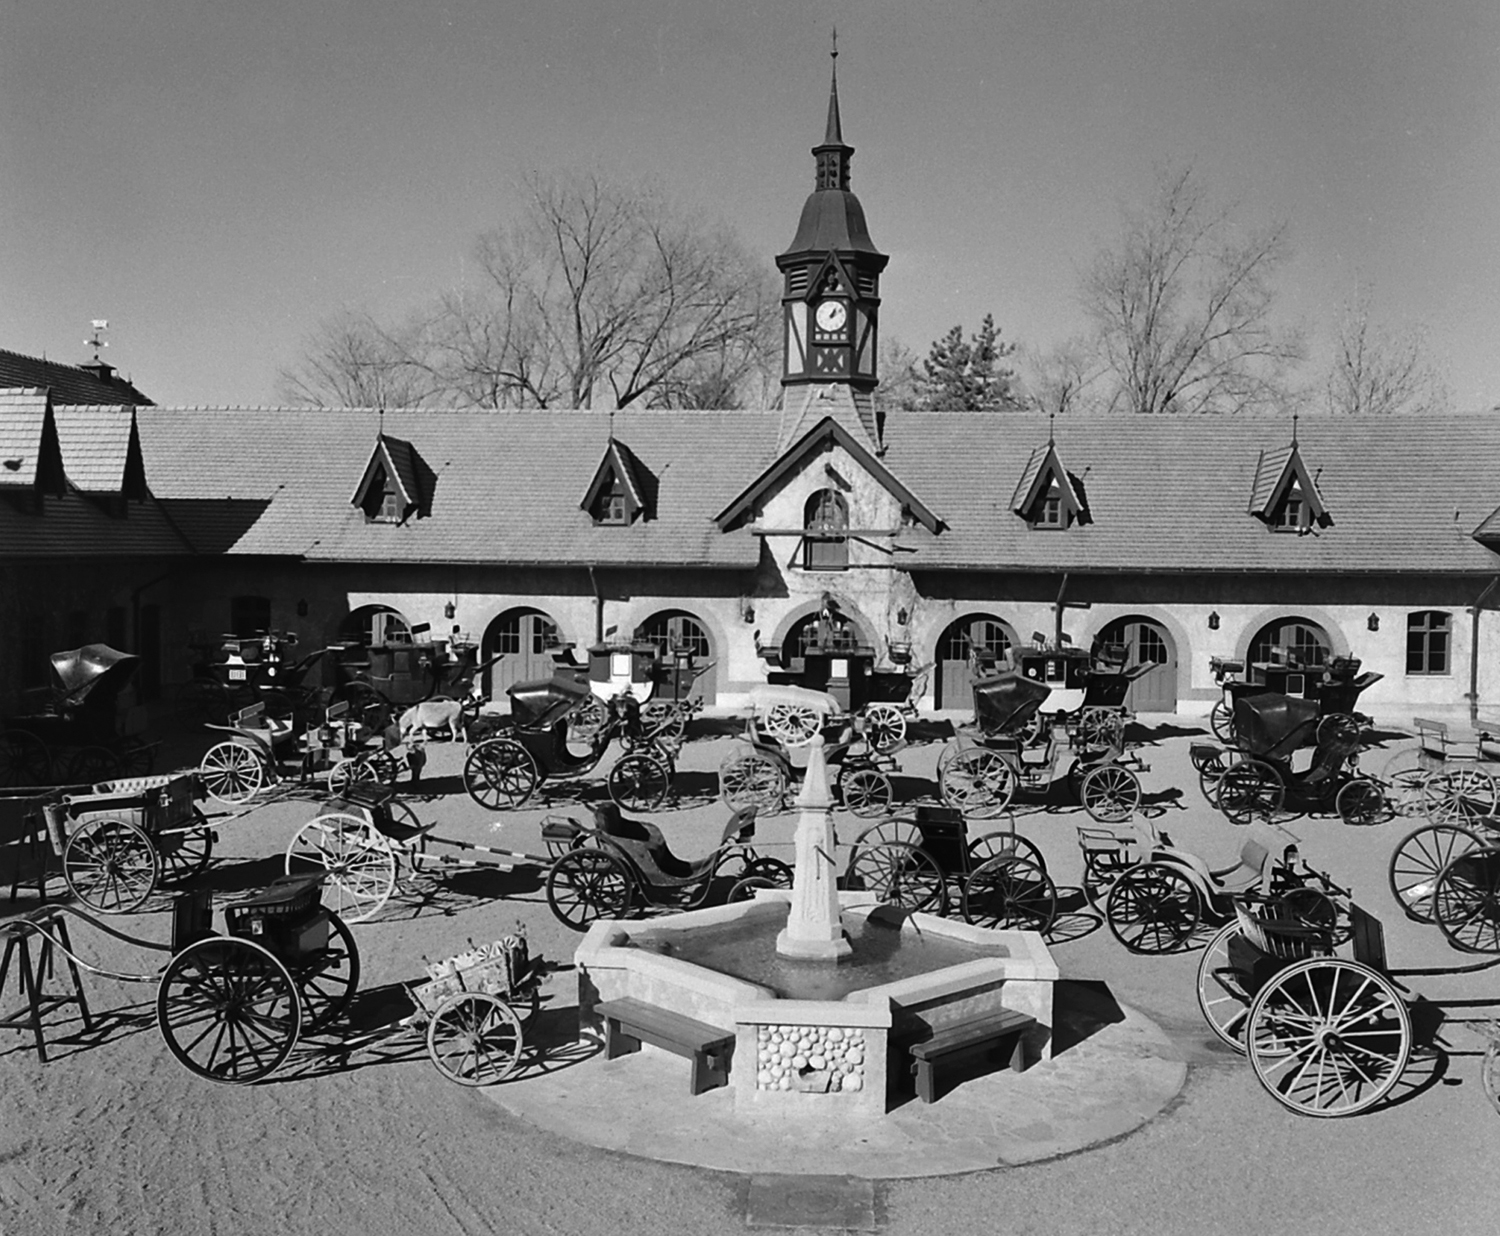 Carriage collection at the Bauernhof ranges from six three-ton coaches aligned at the rear to gigs and donkey cart in front and a ladies' phaeton and French sailor wagon right behind fountain.